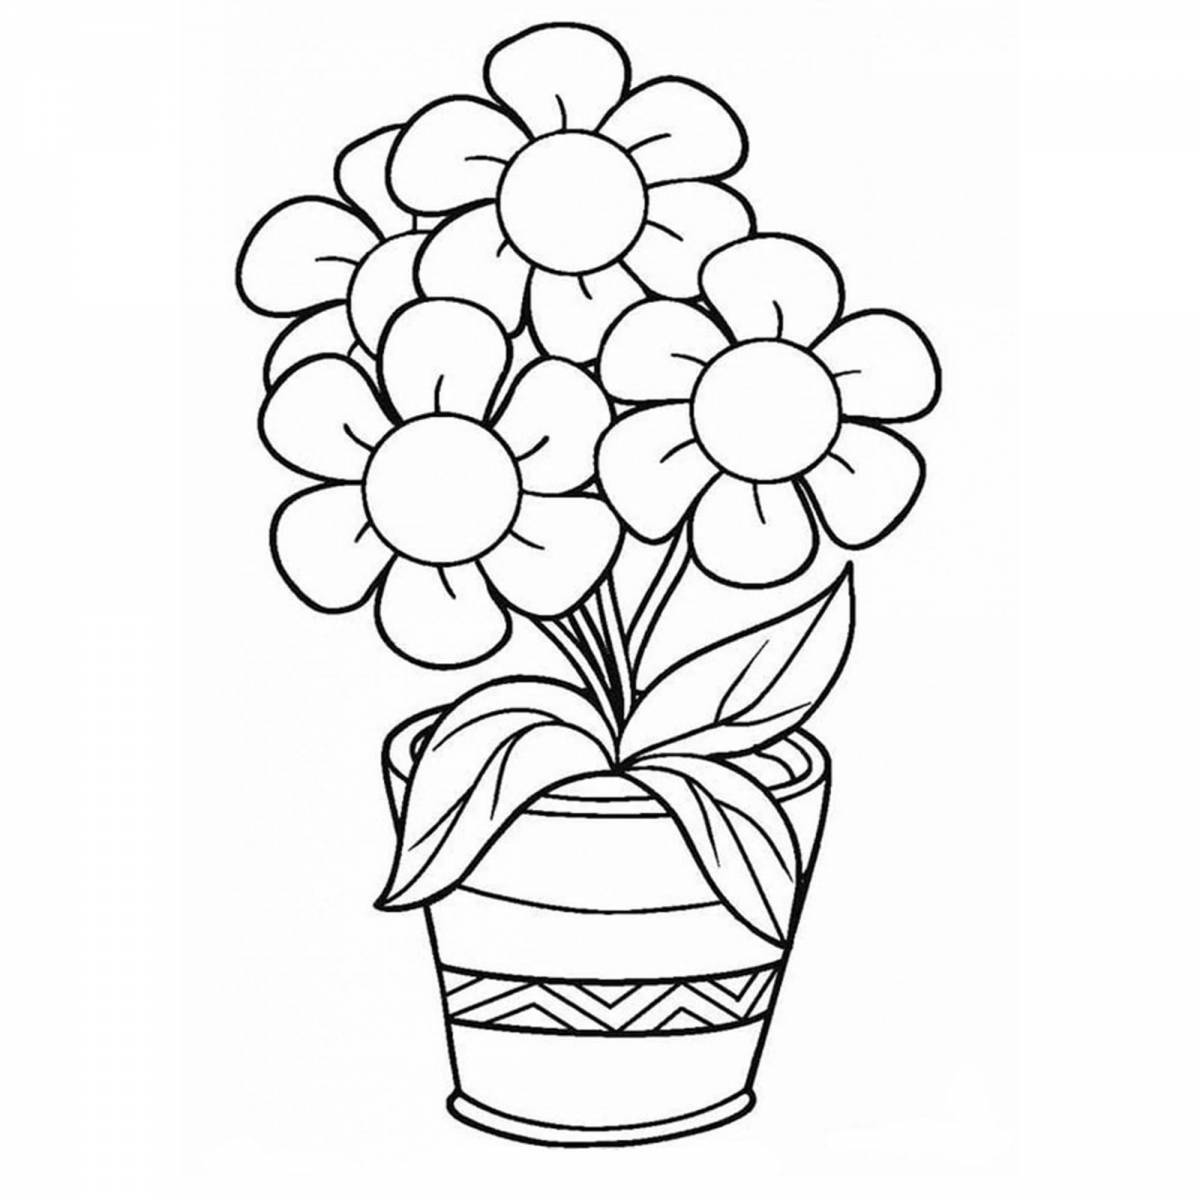 Coloring page dazzling bouquet